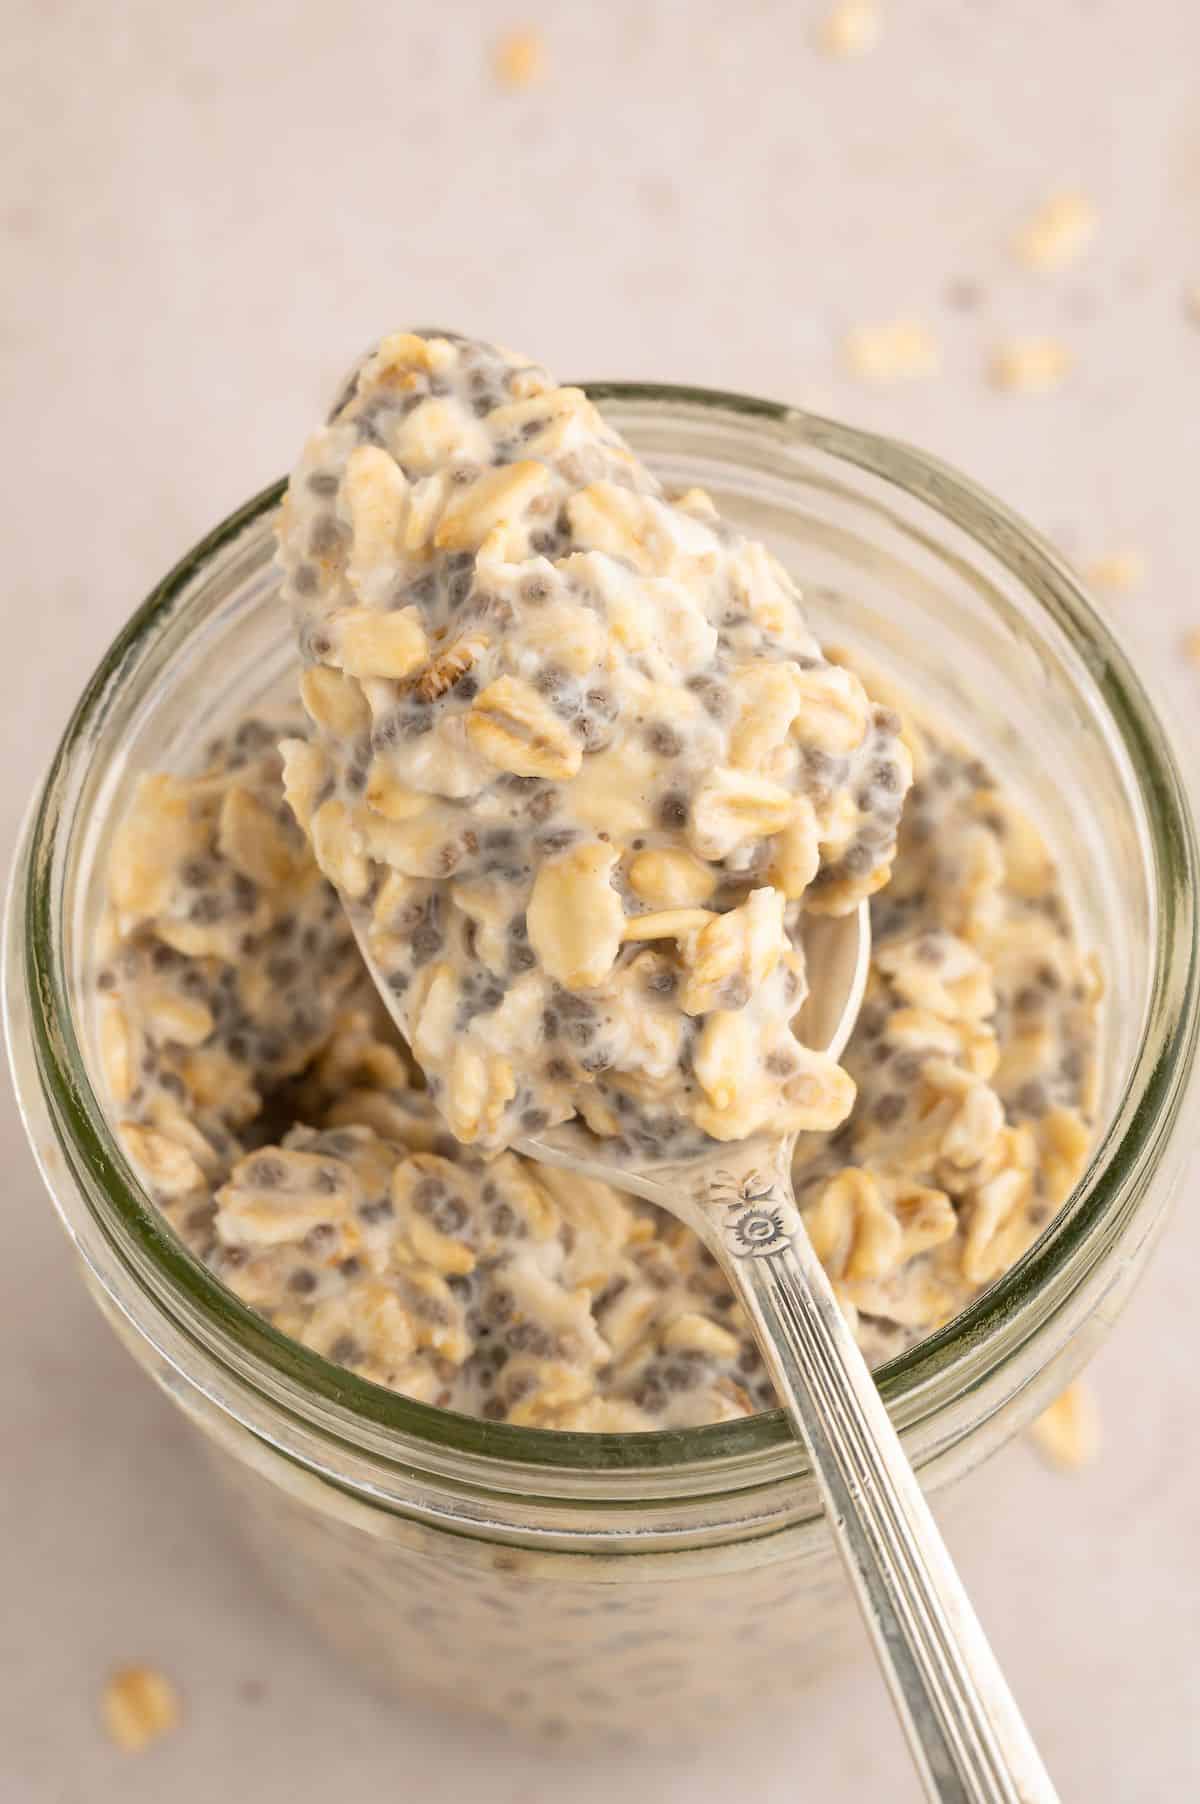 Overnight oats in a jar with a spoon resting on top holding a spoonful of overnight oats.